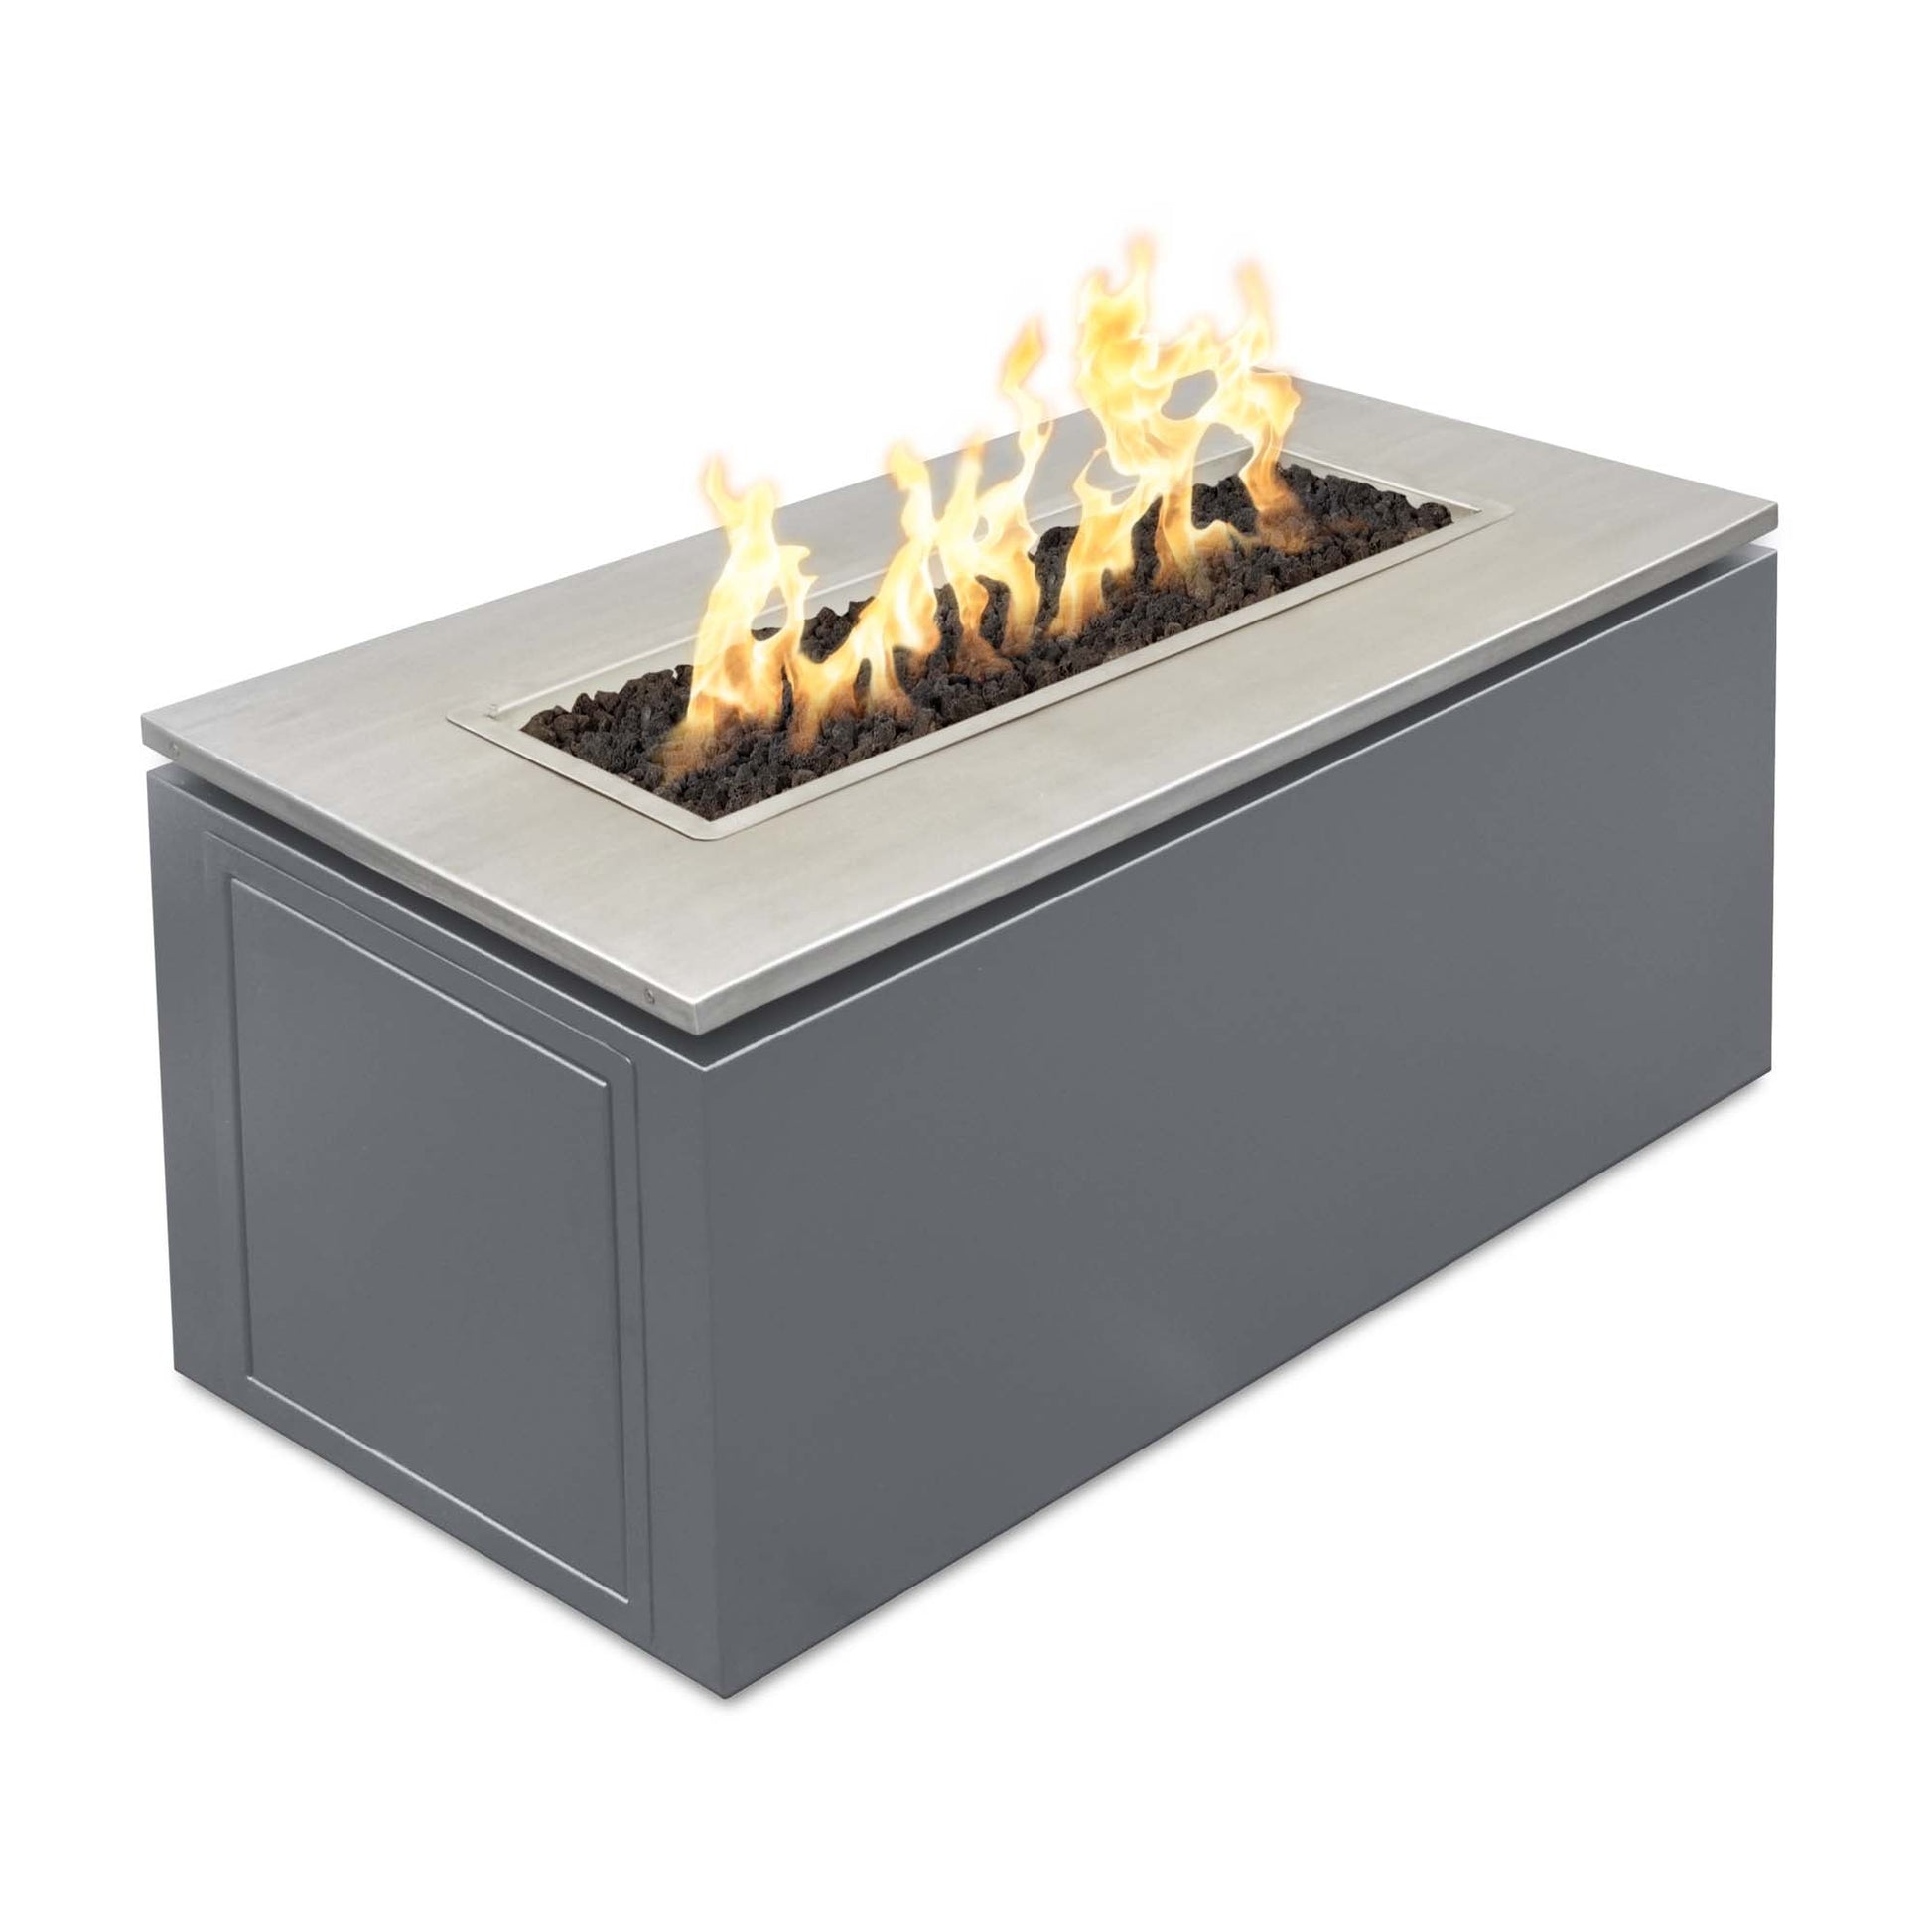 The Outdoor Plus Rectangular Merona 46" Stainless Steel Natural Gas Fire Pit with Flame Sense with Spark Ignition